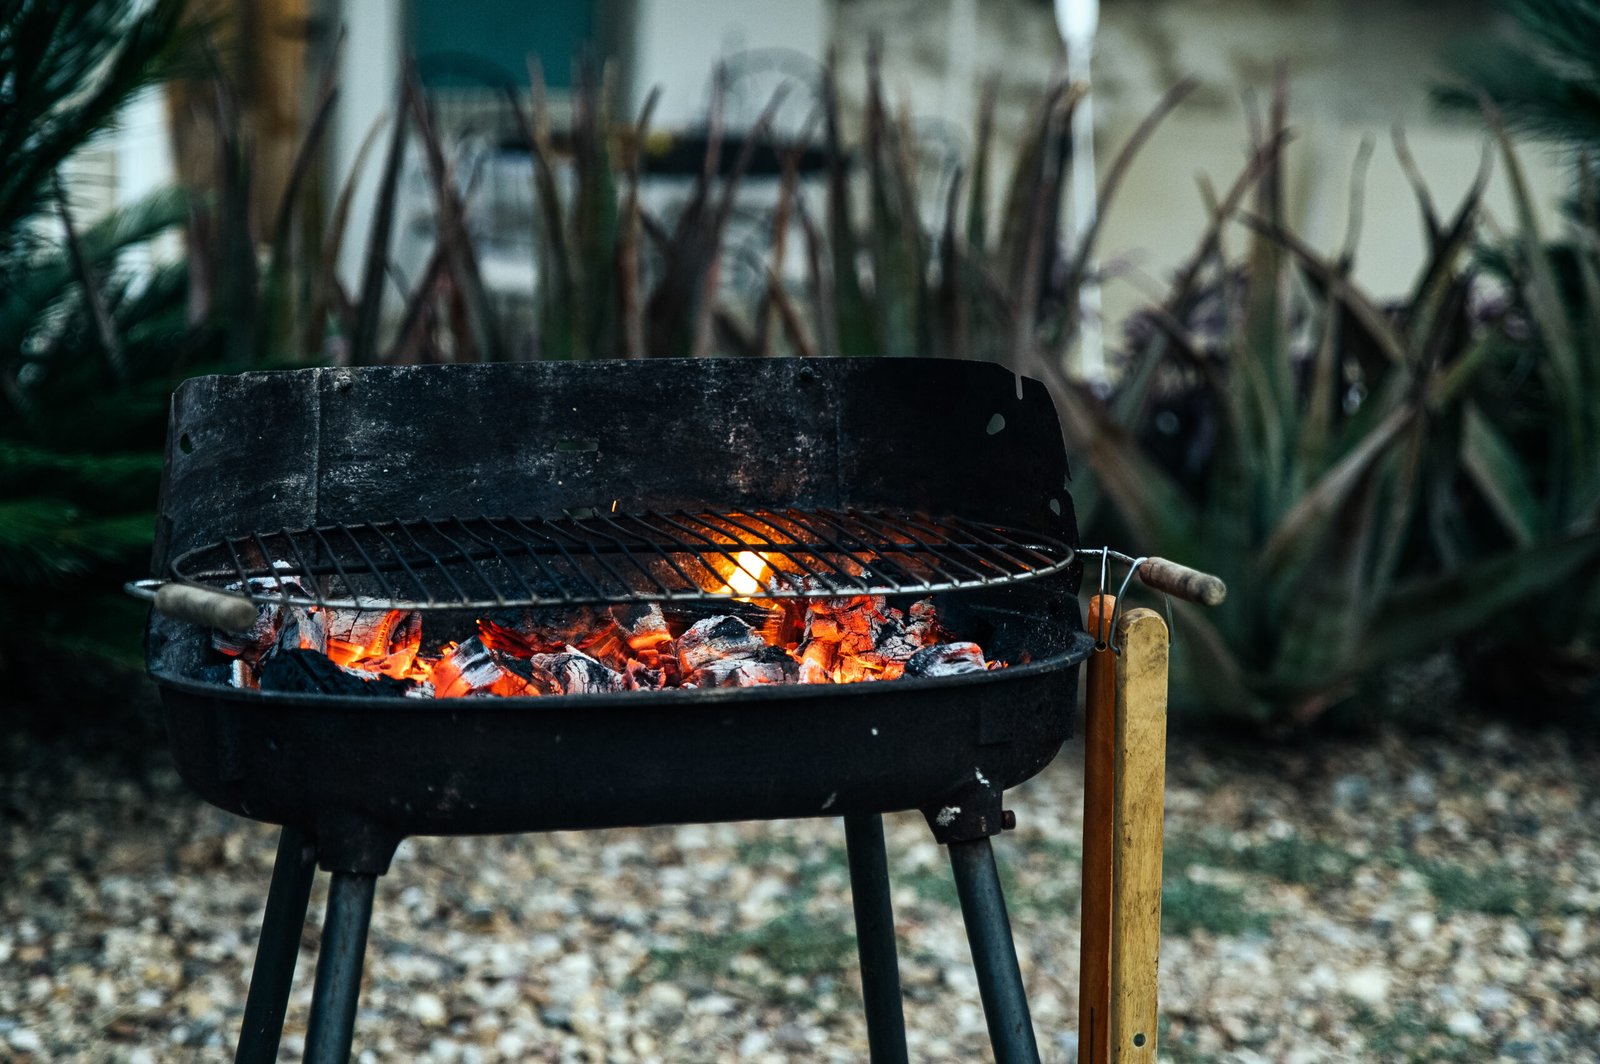 Safe Grilling on Argentinian Charcoal Grill: Tips to Avoid Accidents